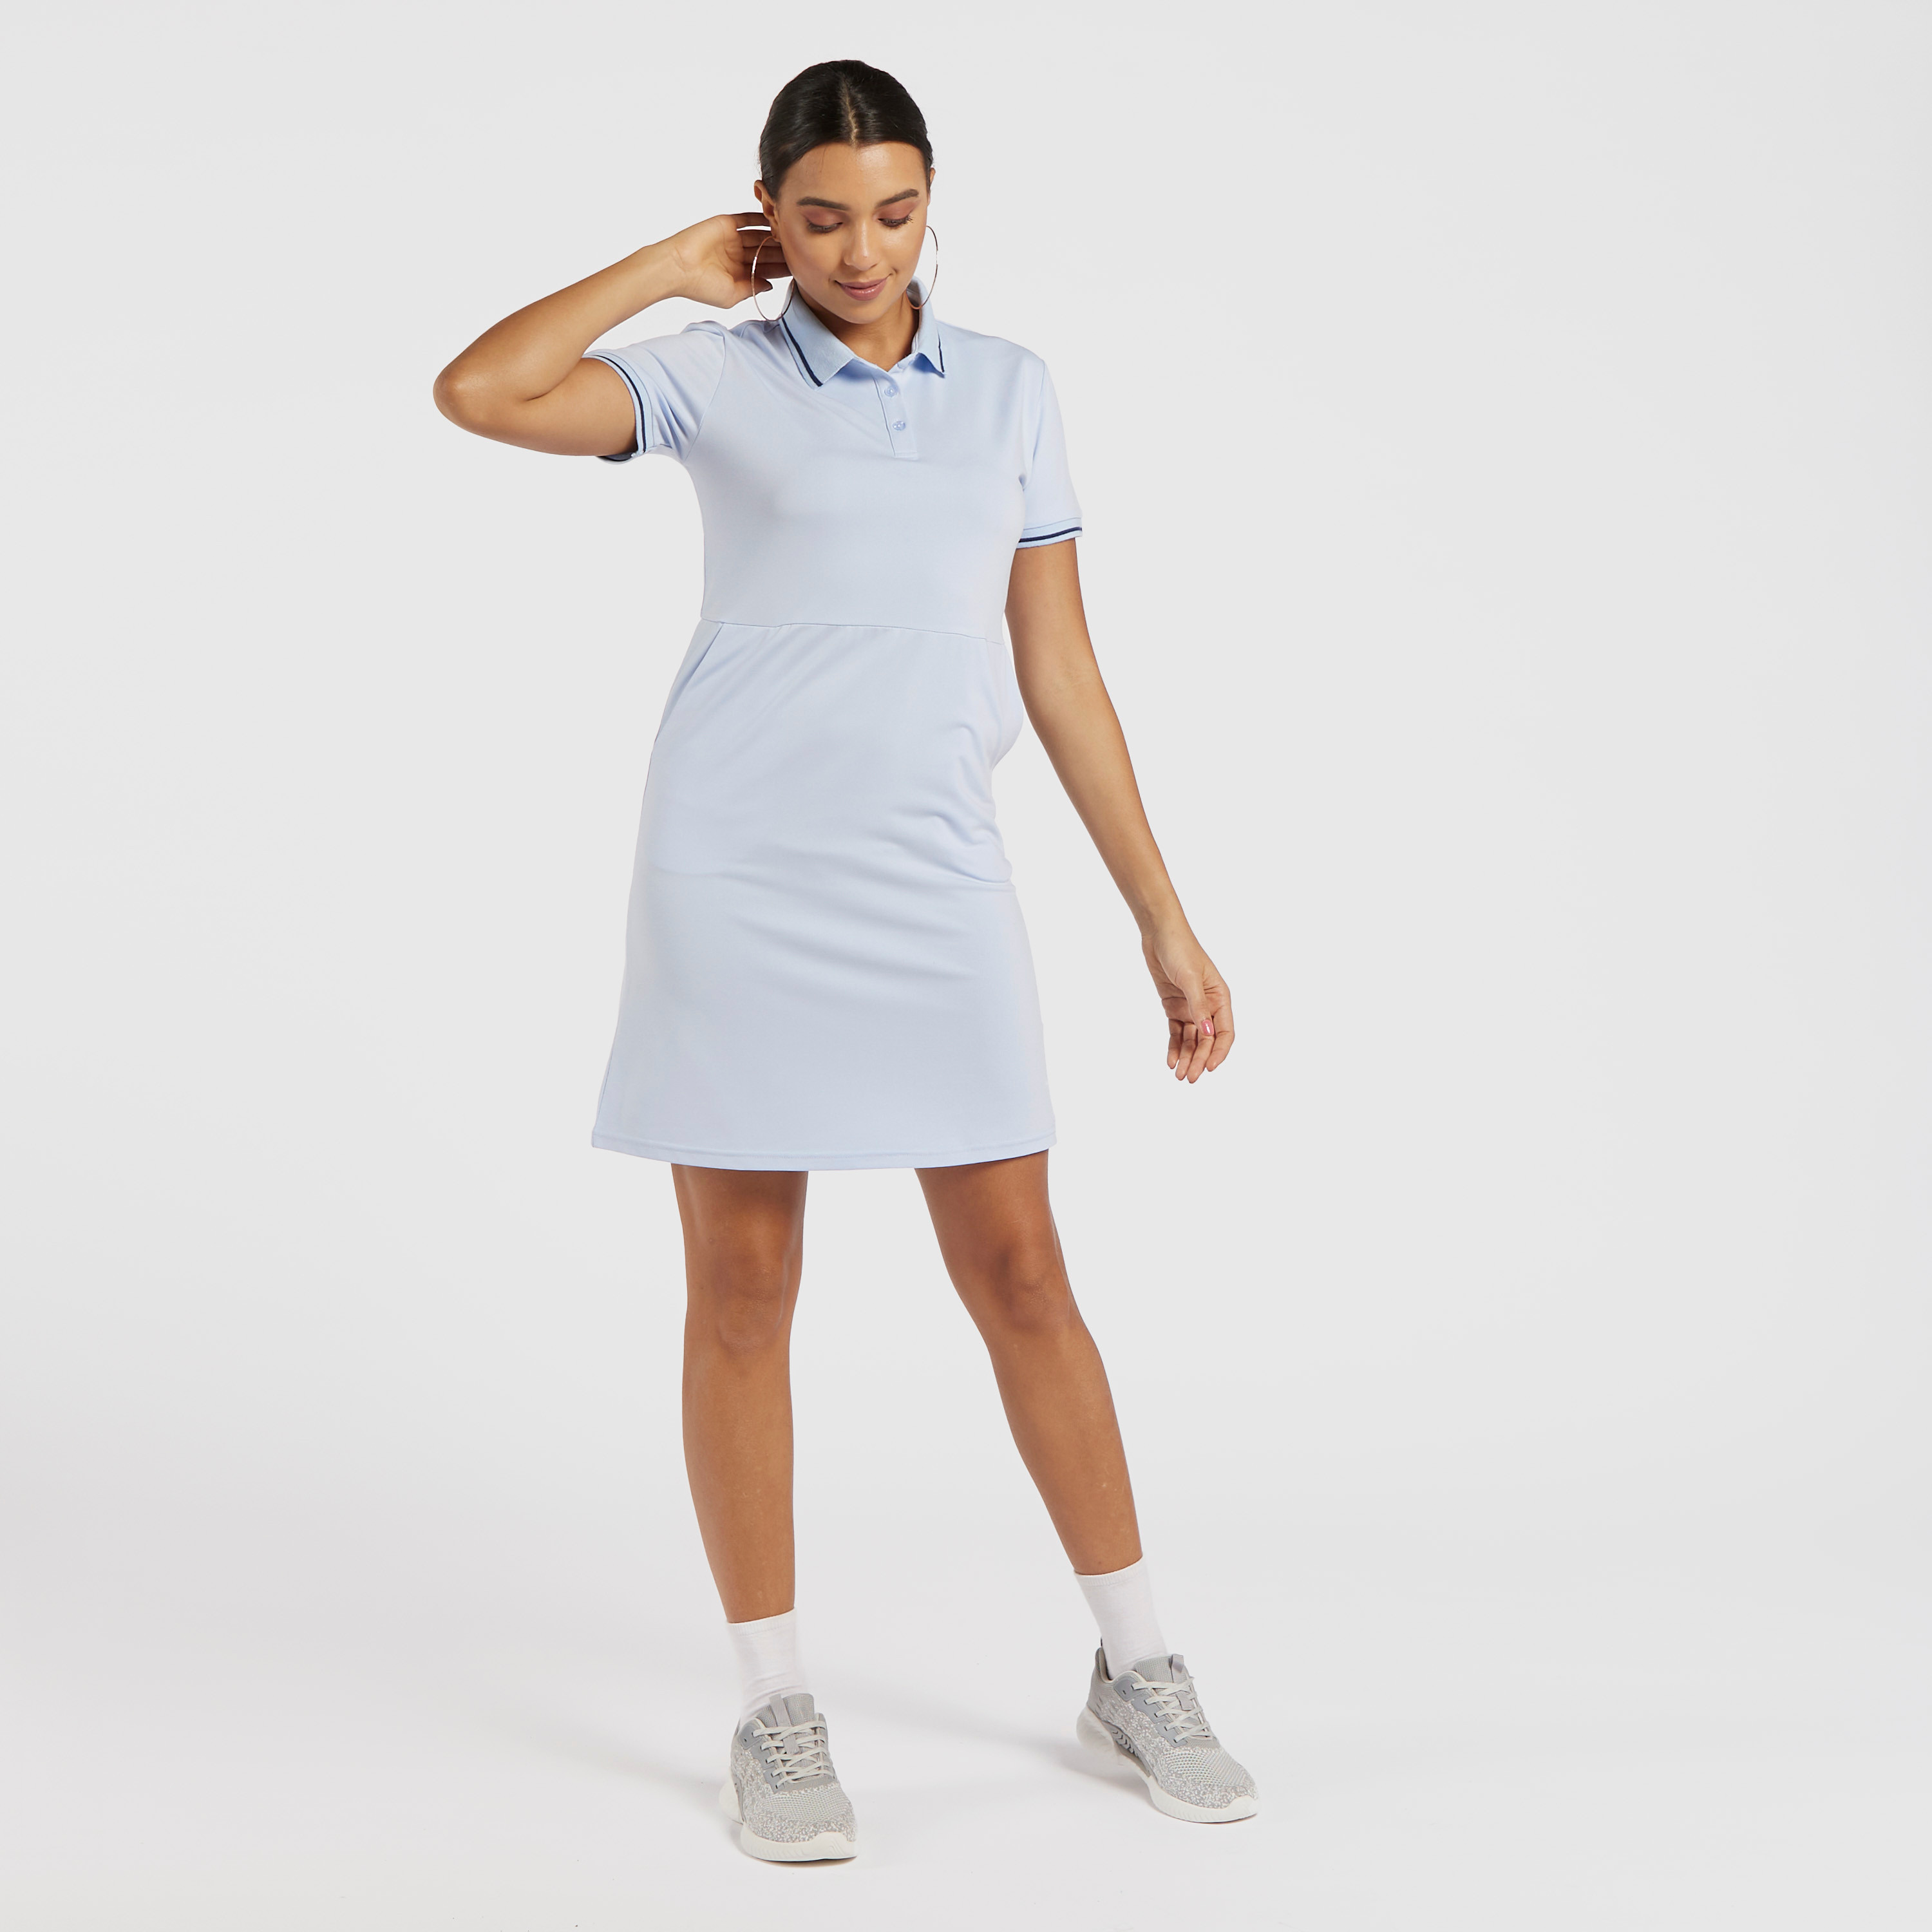 Shop Solid Polo Neck Tennis Dress with Short Sleeves and Pockets Online Max UAE